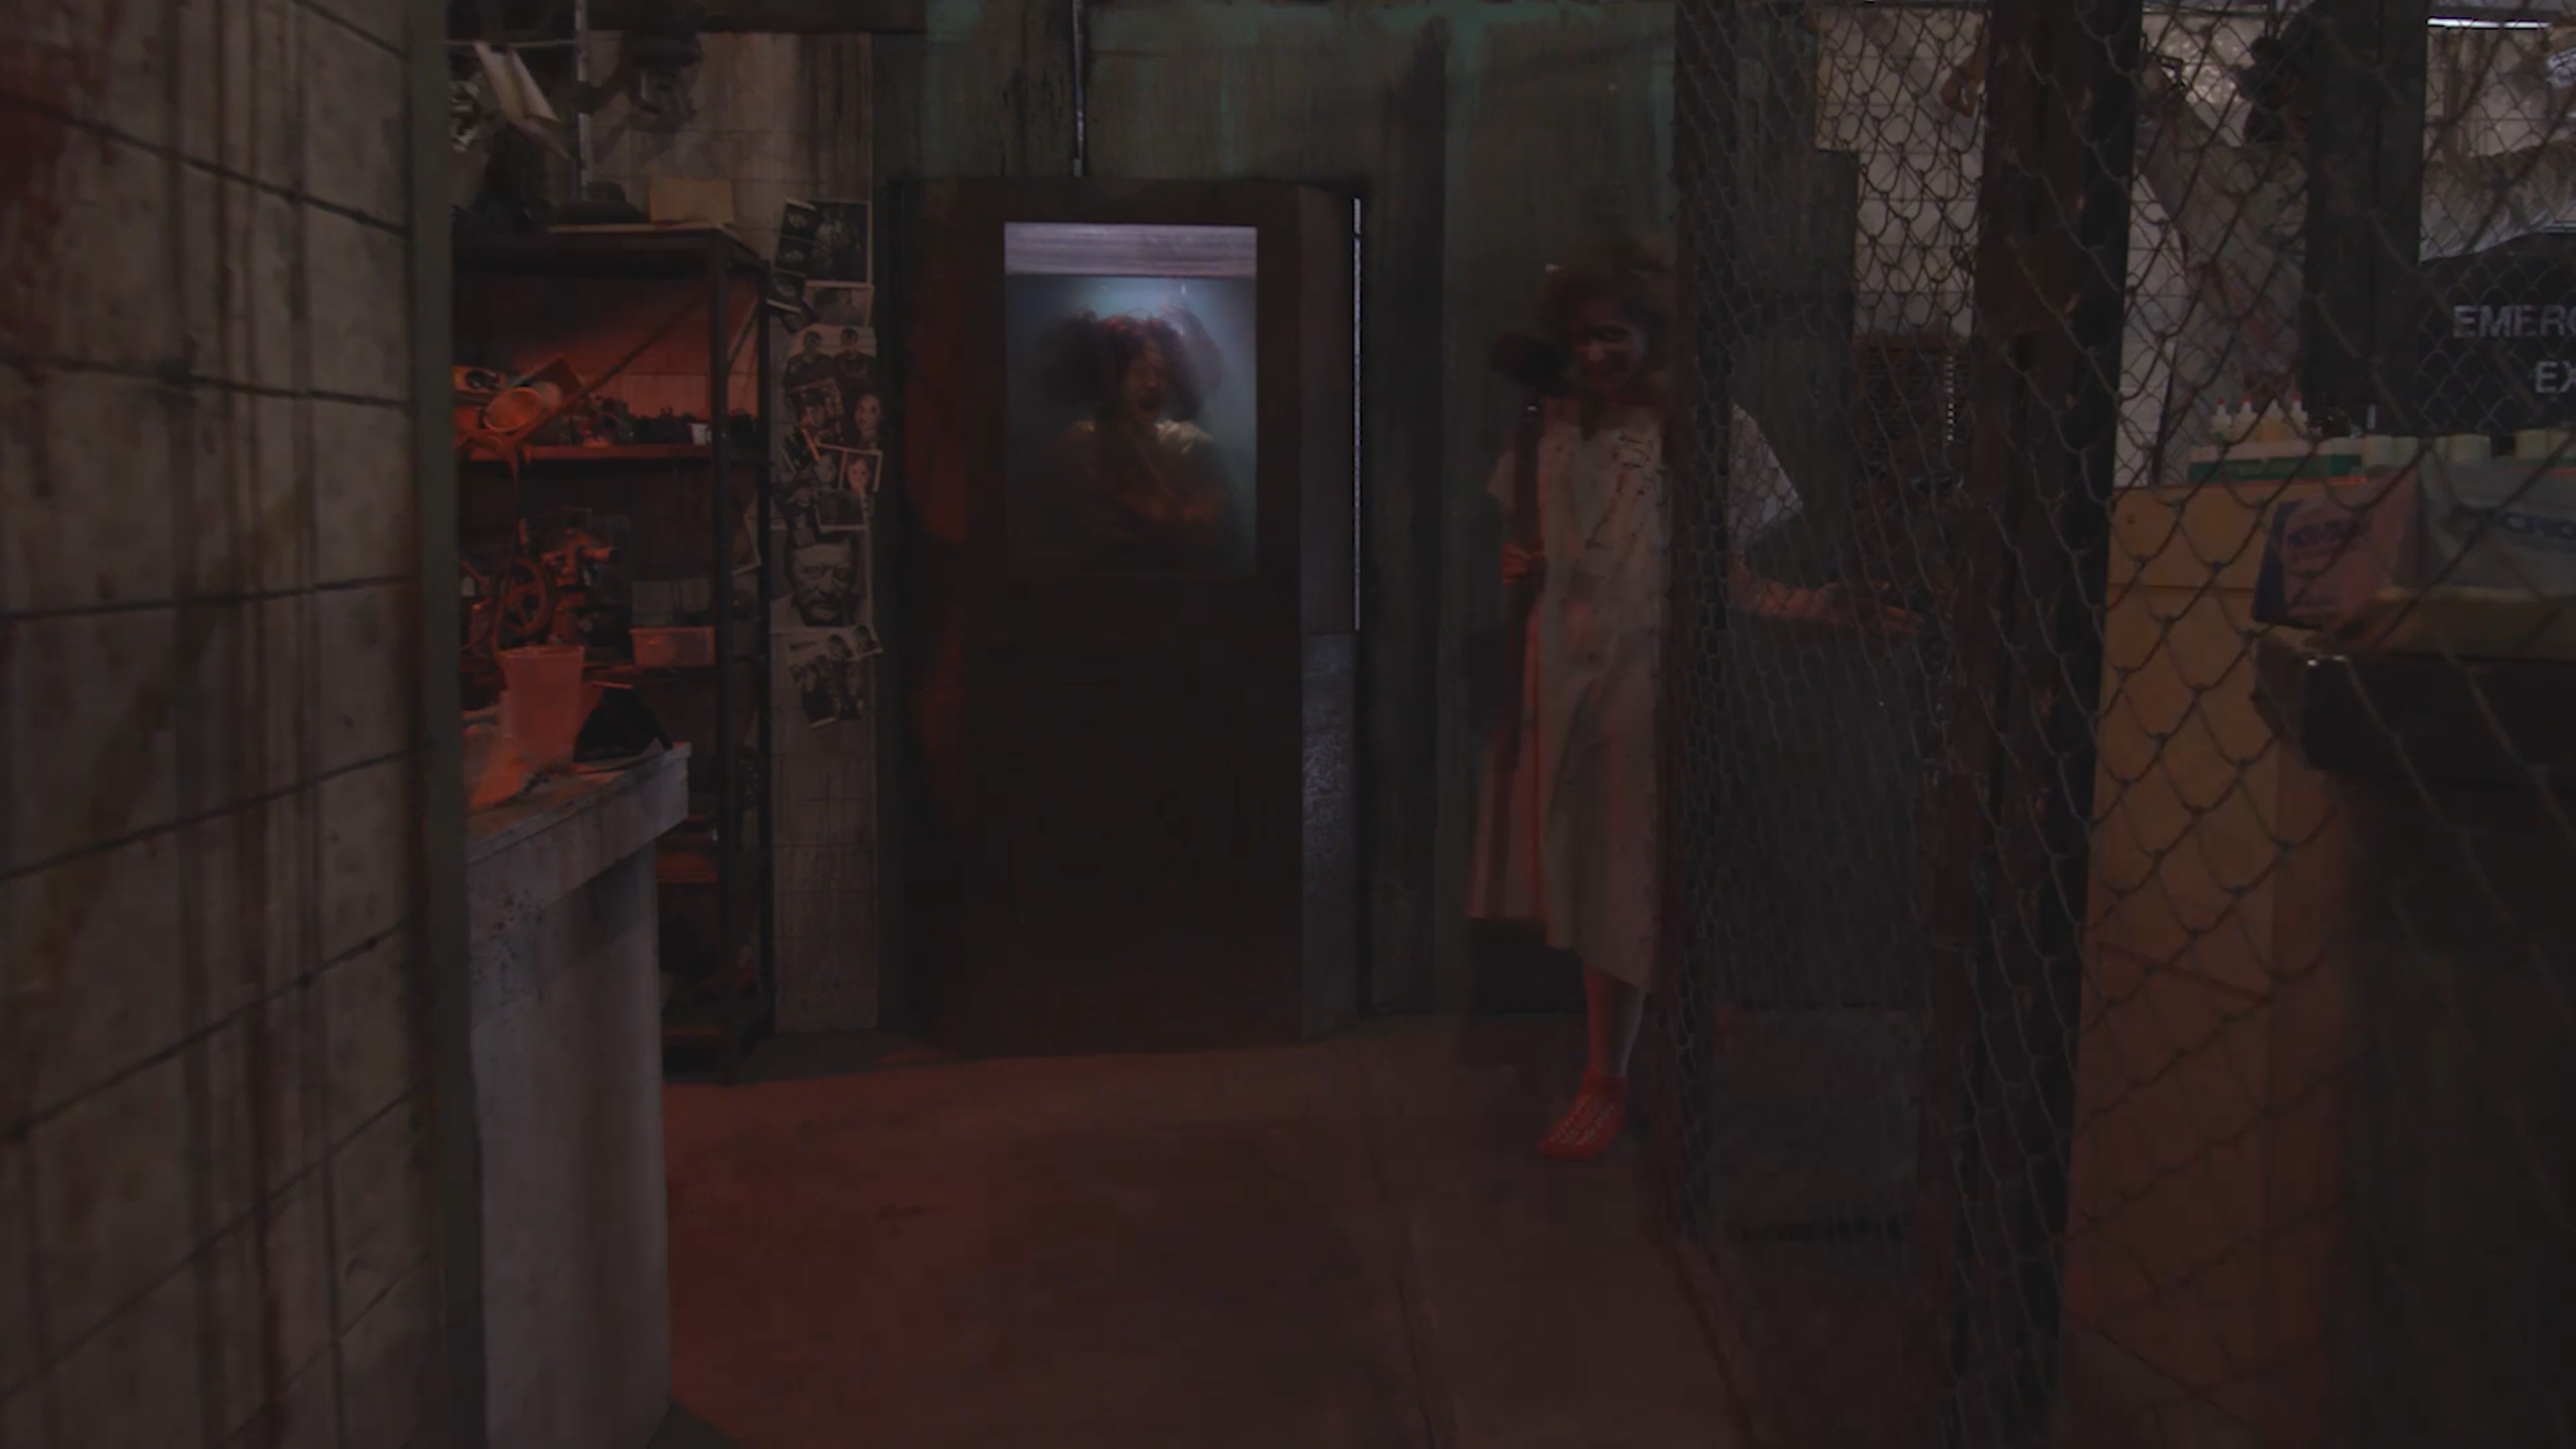 Zombie-looking woman in a haunted house setting, holding a sledge hammer